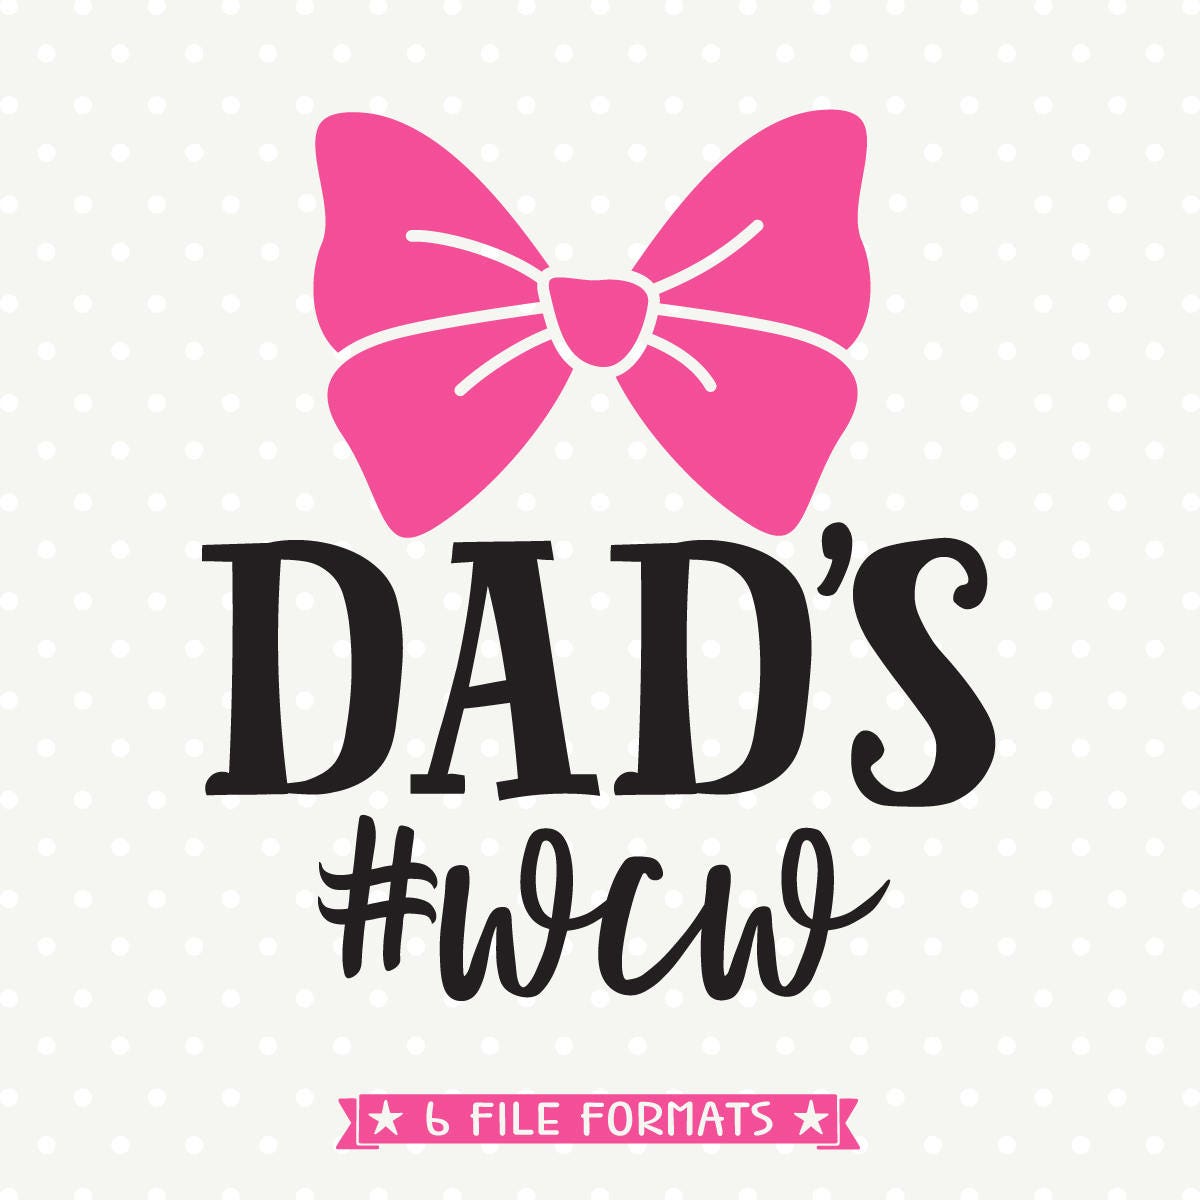 Download Dads wcw SVG Hair Bow file Girls Shirt svg file Woman Crush